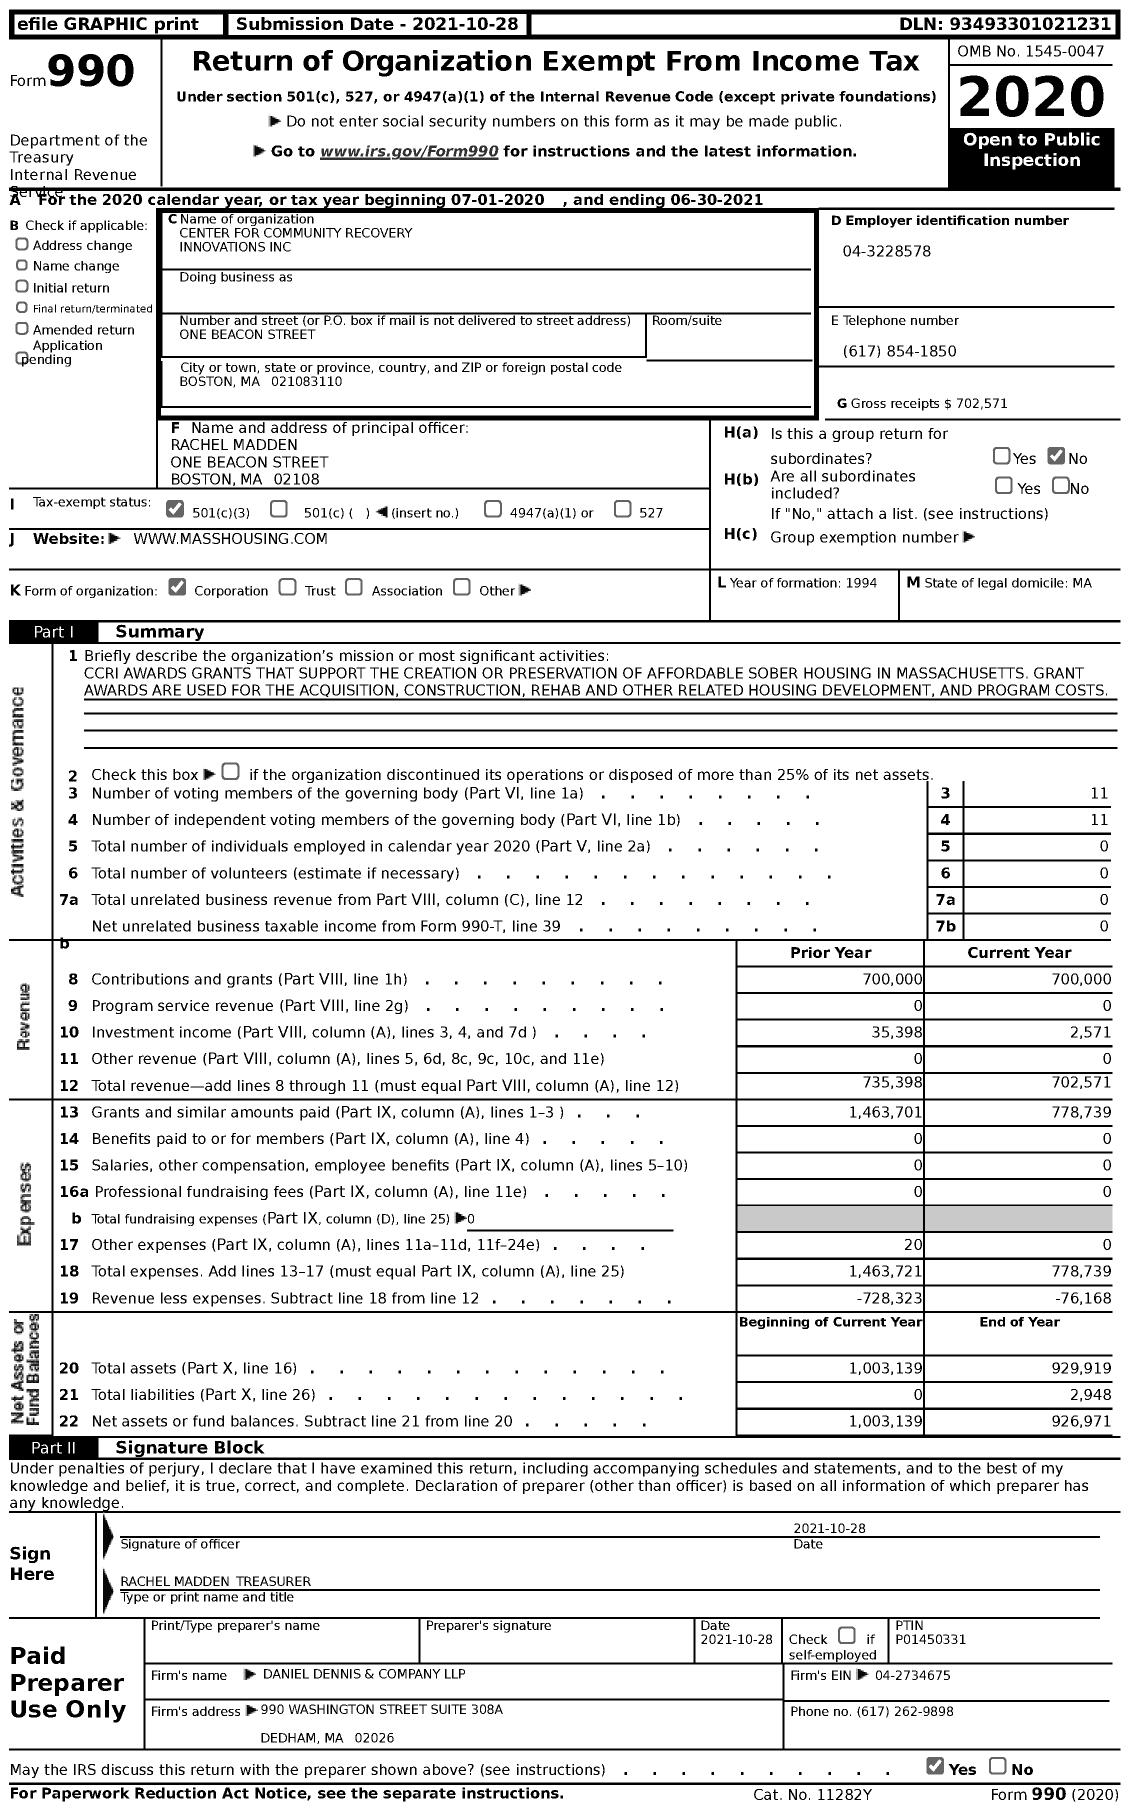 Image of first page of 2020 Form 990 for Center for Community Recovery Innovations